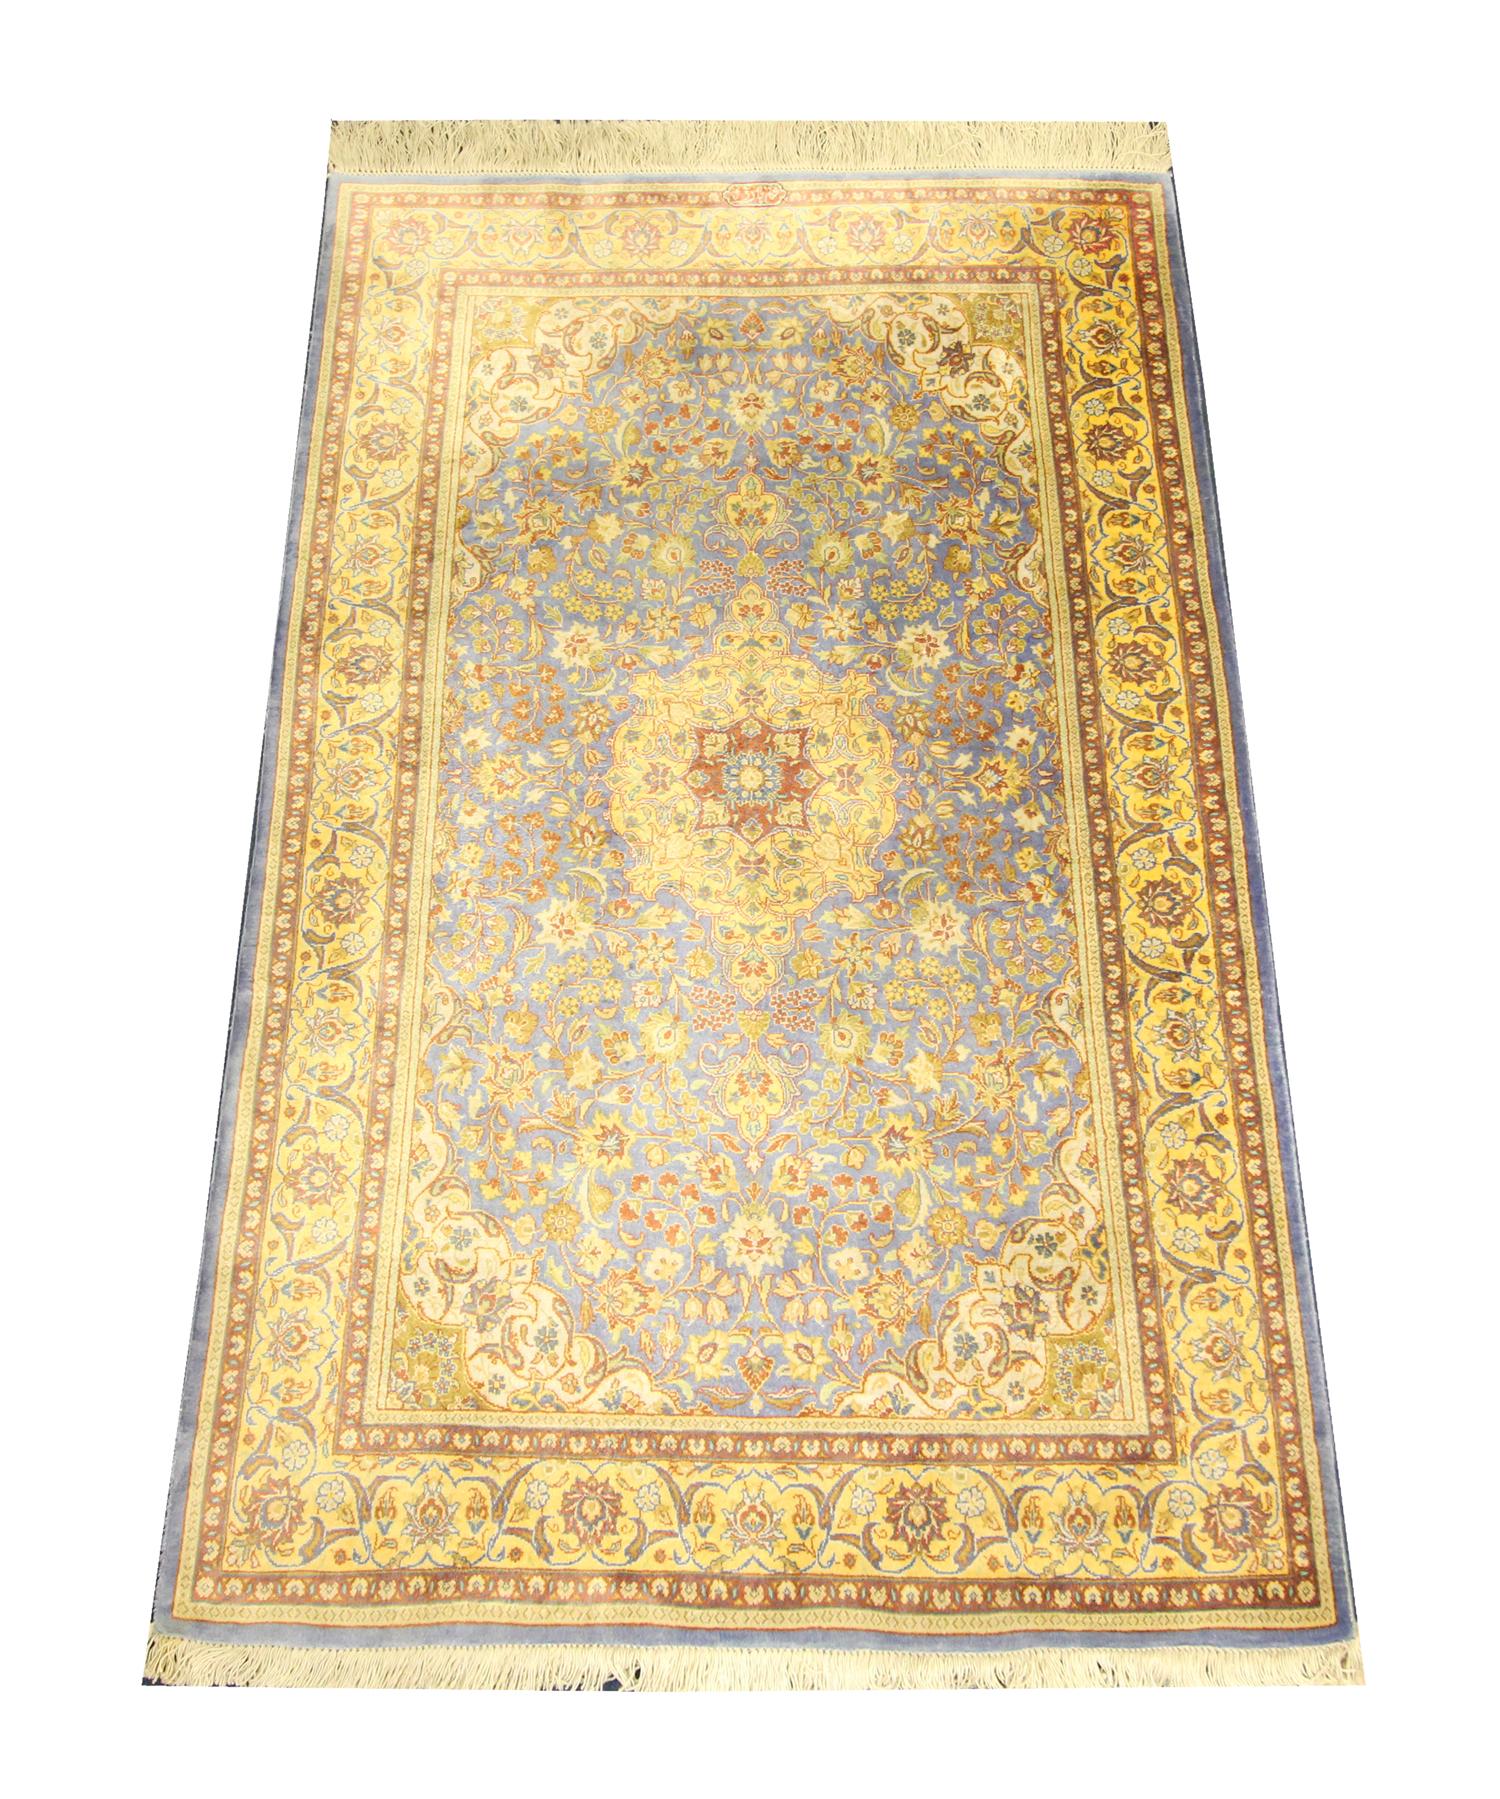 This luxurious grey silk rug was woven by hand in Turkey in the 1990s. The central design has been woven on a grey background with a large medallion and surrounding decorative design woven in beige, gold, and cream accents. This fine oriental rug